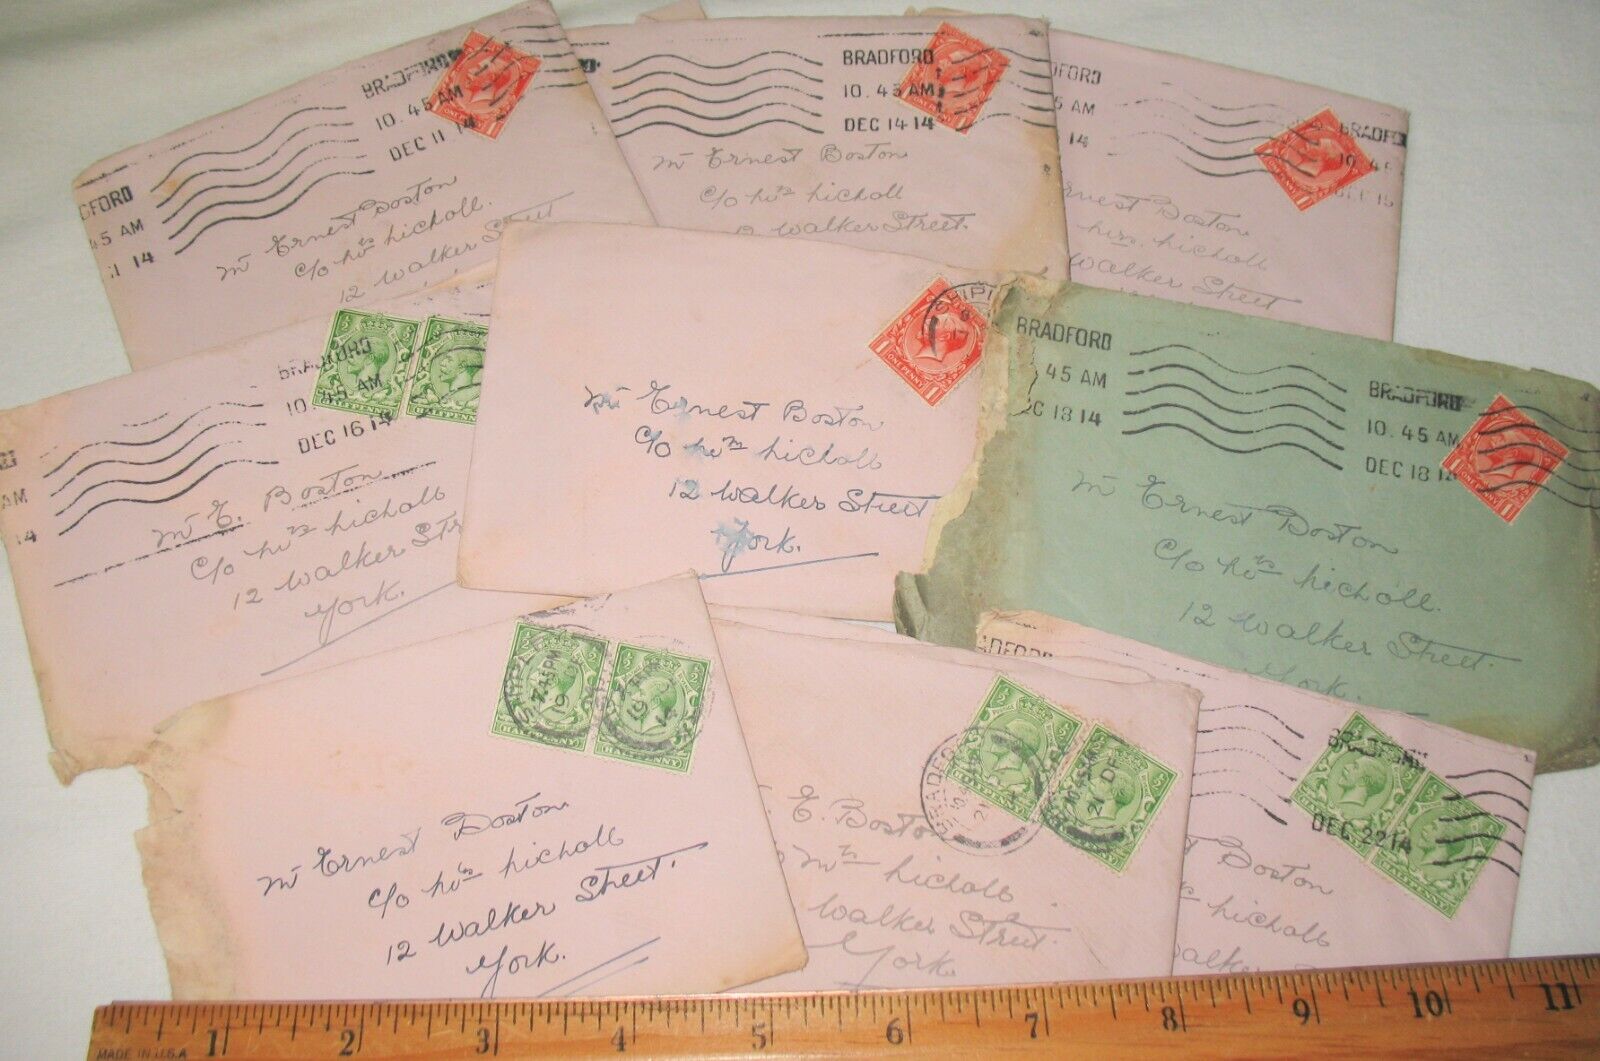 WWI World War 1 girl's sweetheart letter insecurities of him being away 1/bid